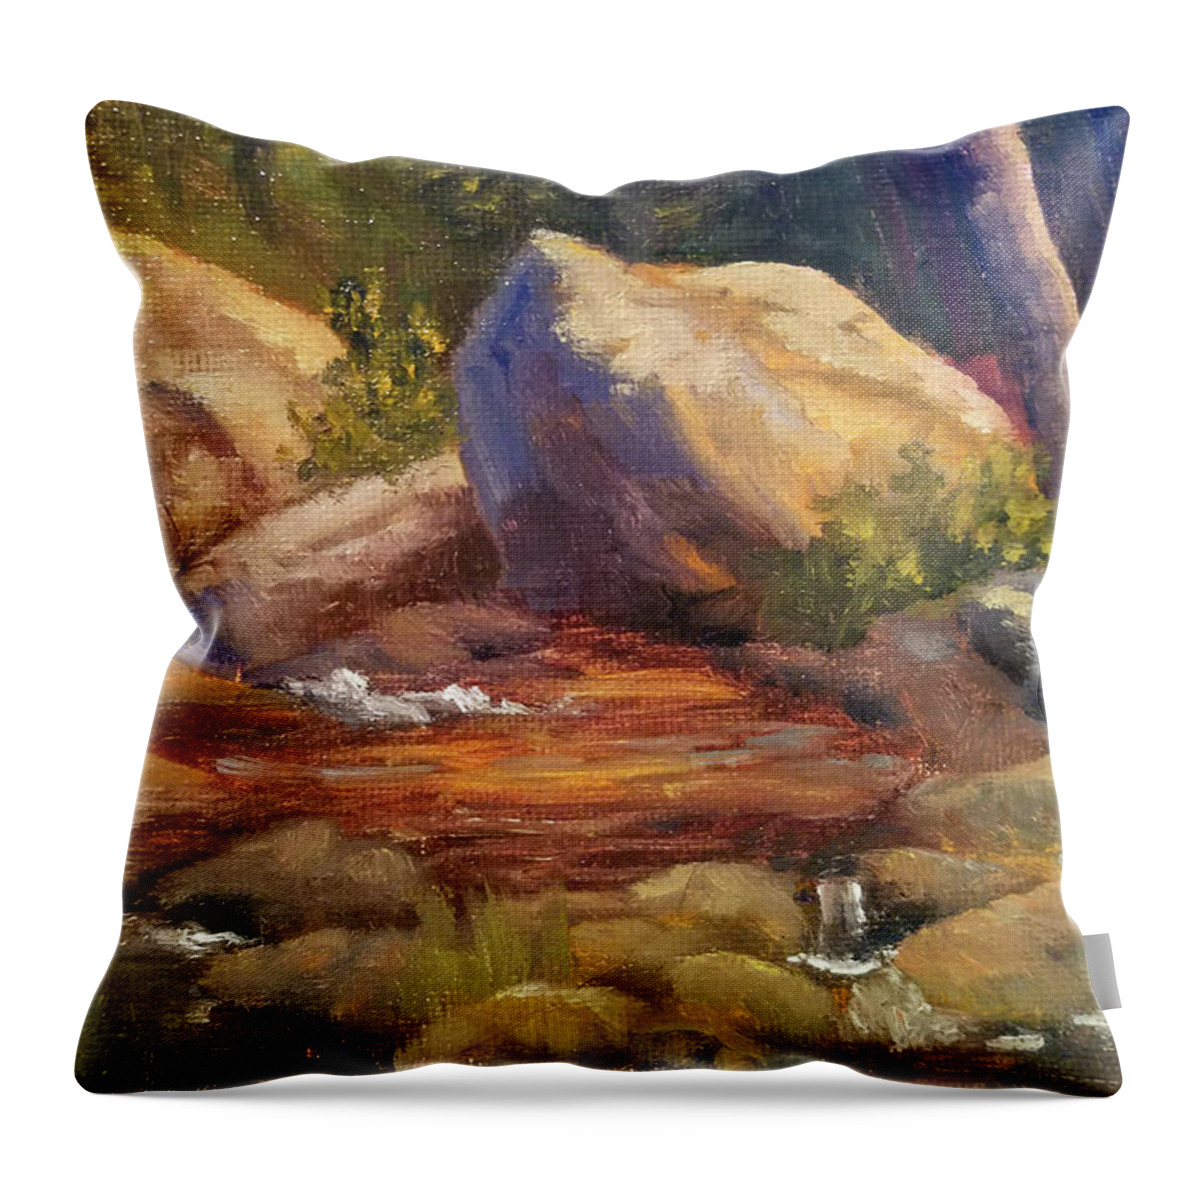 Rocks Throw Pillow featuring the painting Barely a Trickle by Sharon E Allen